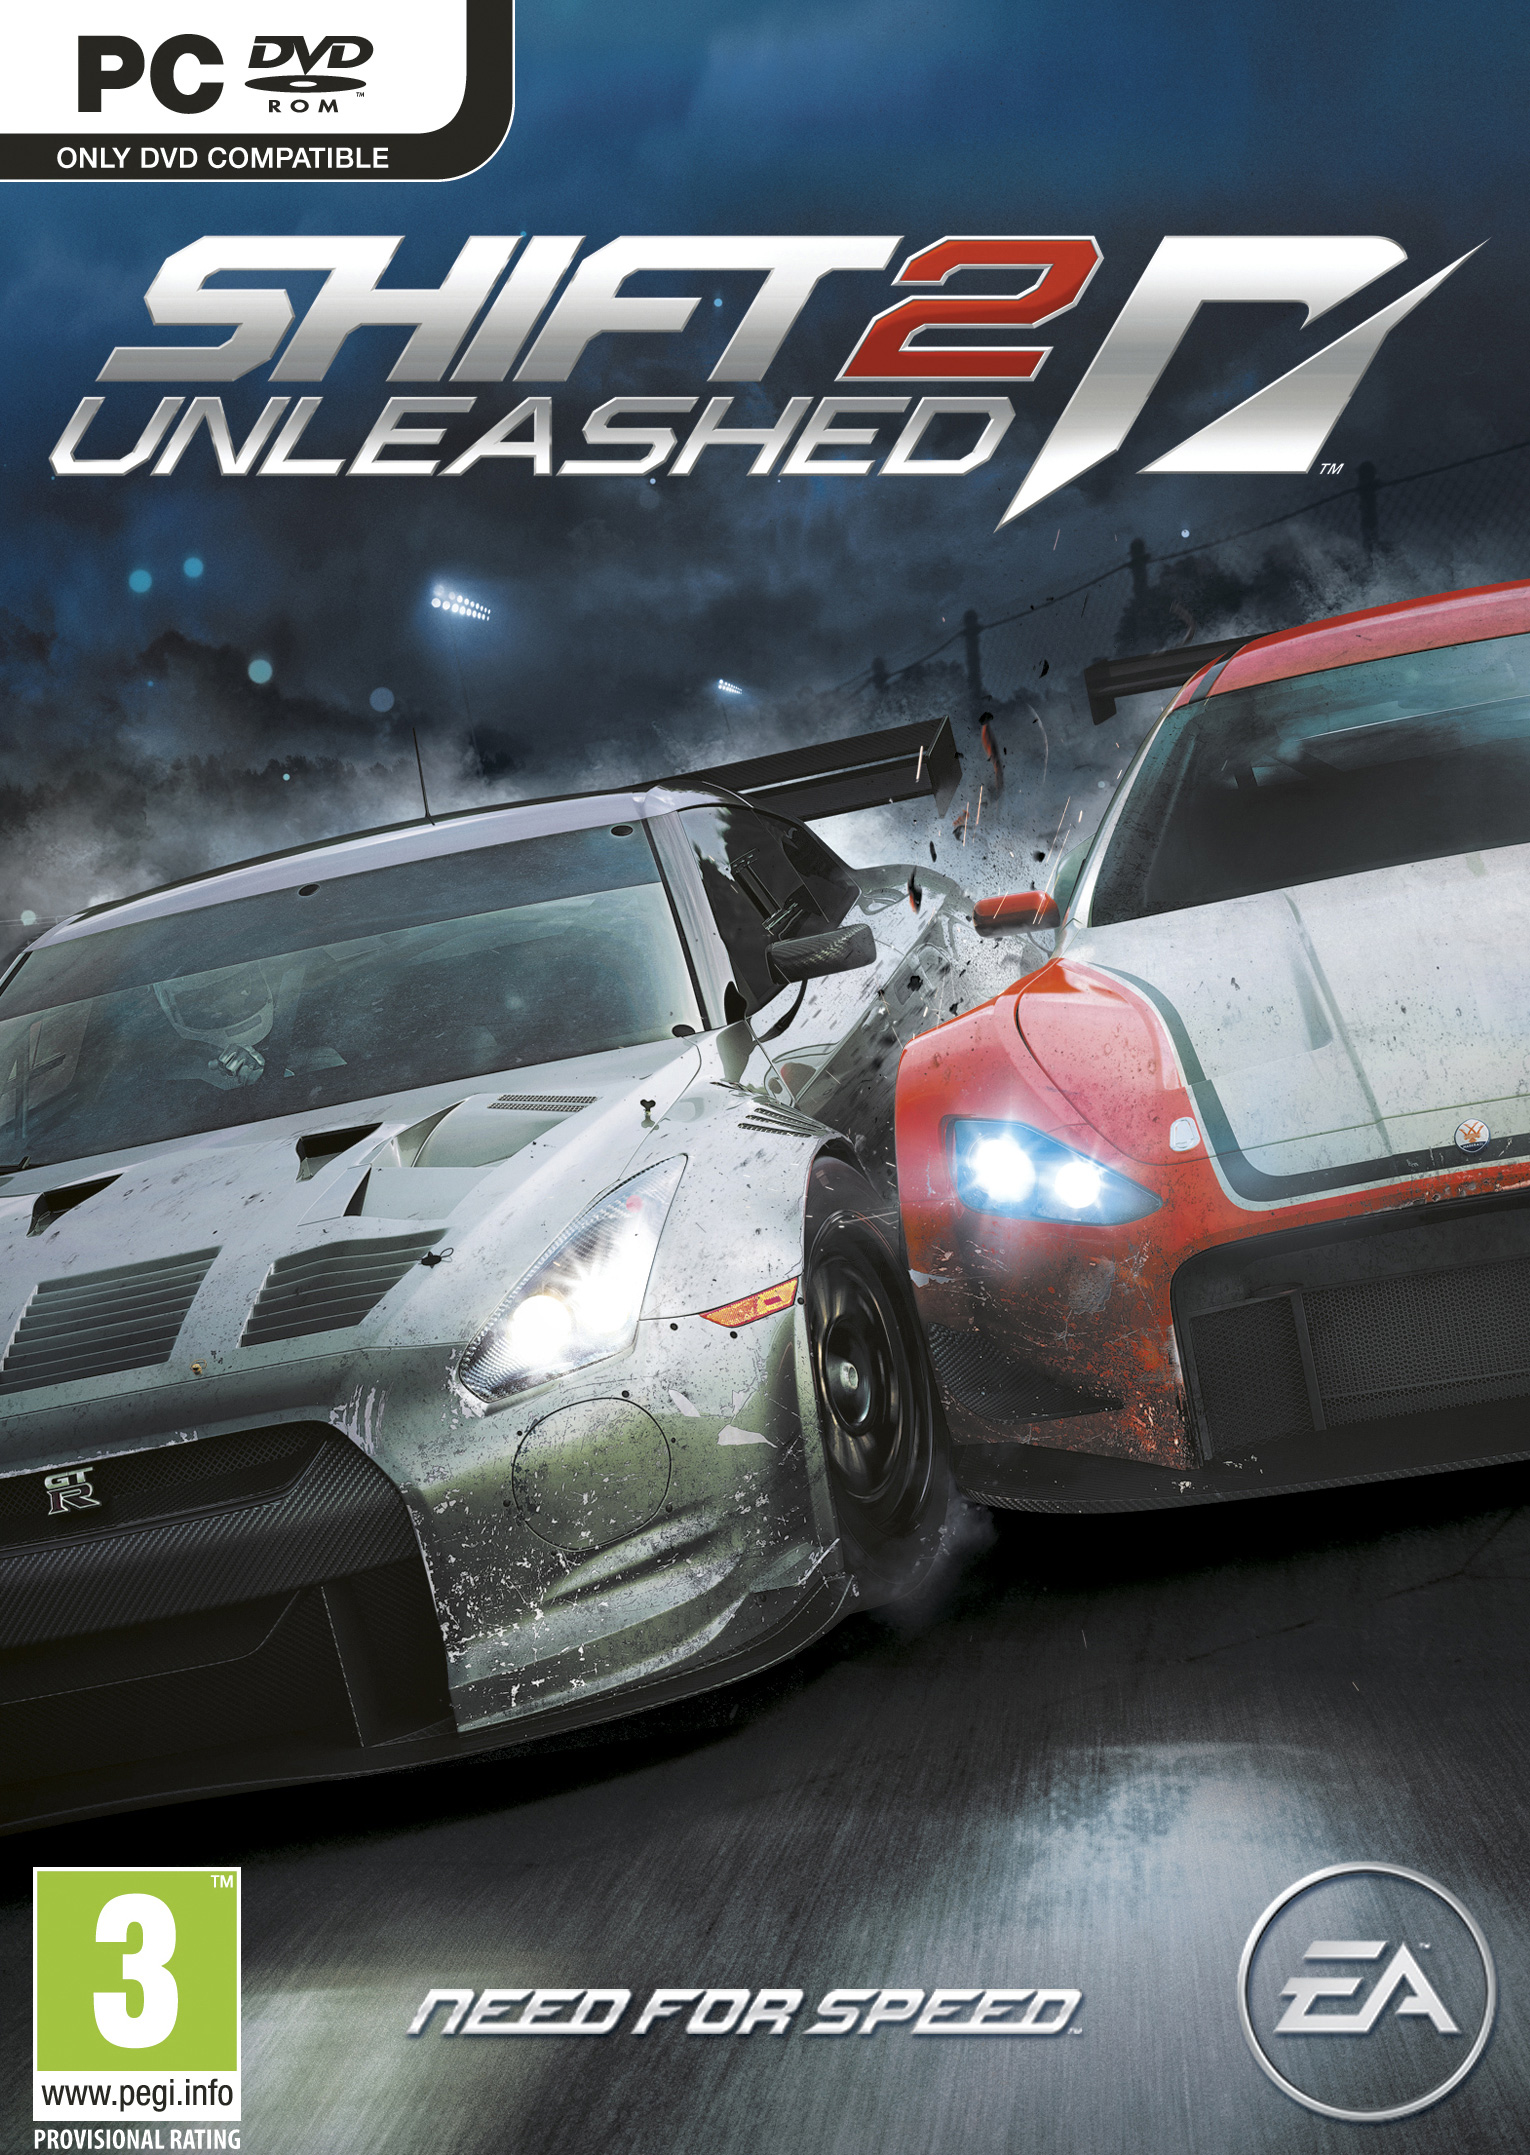 Need for Speed Shift 2: Unleashed - pedn DVD obal